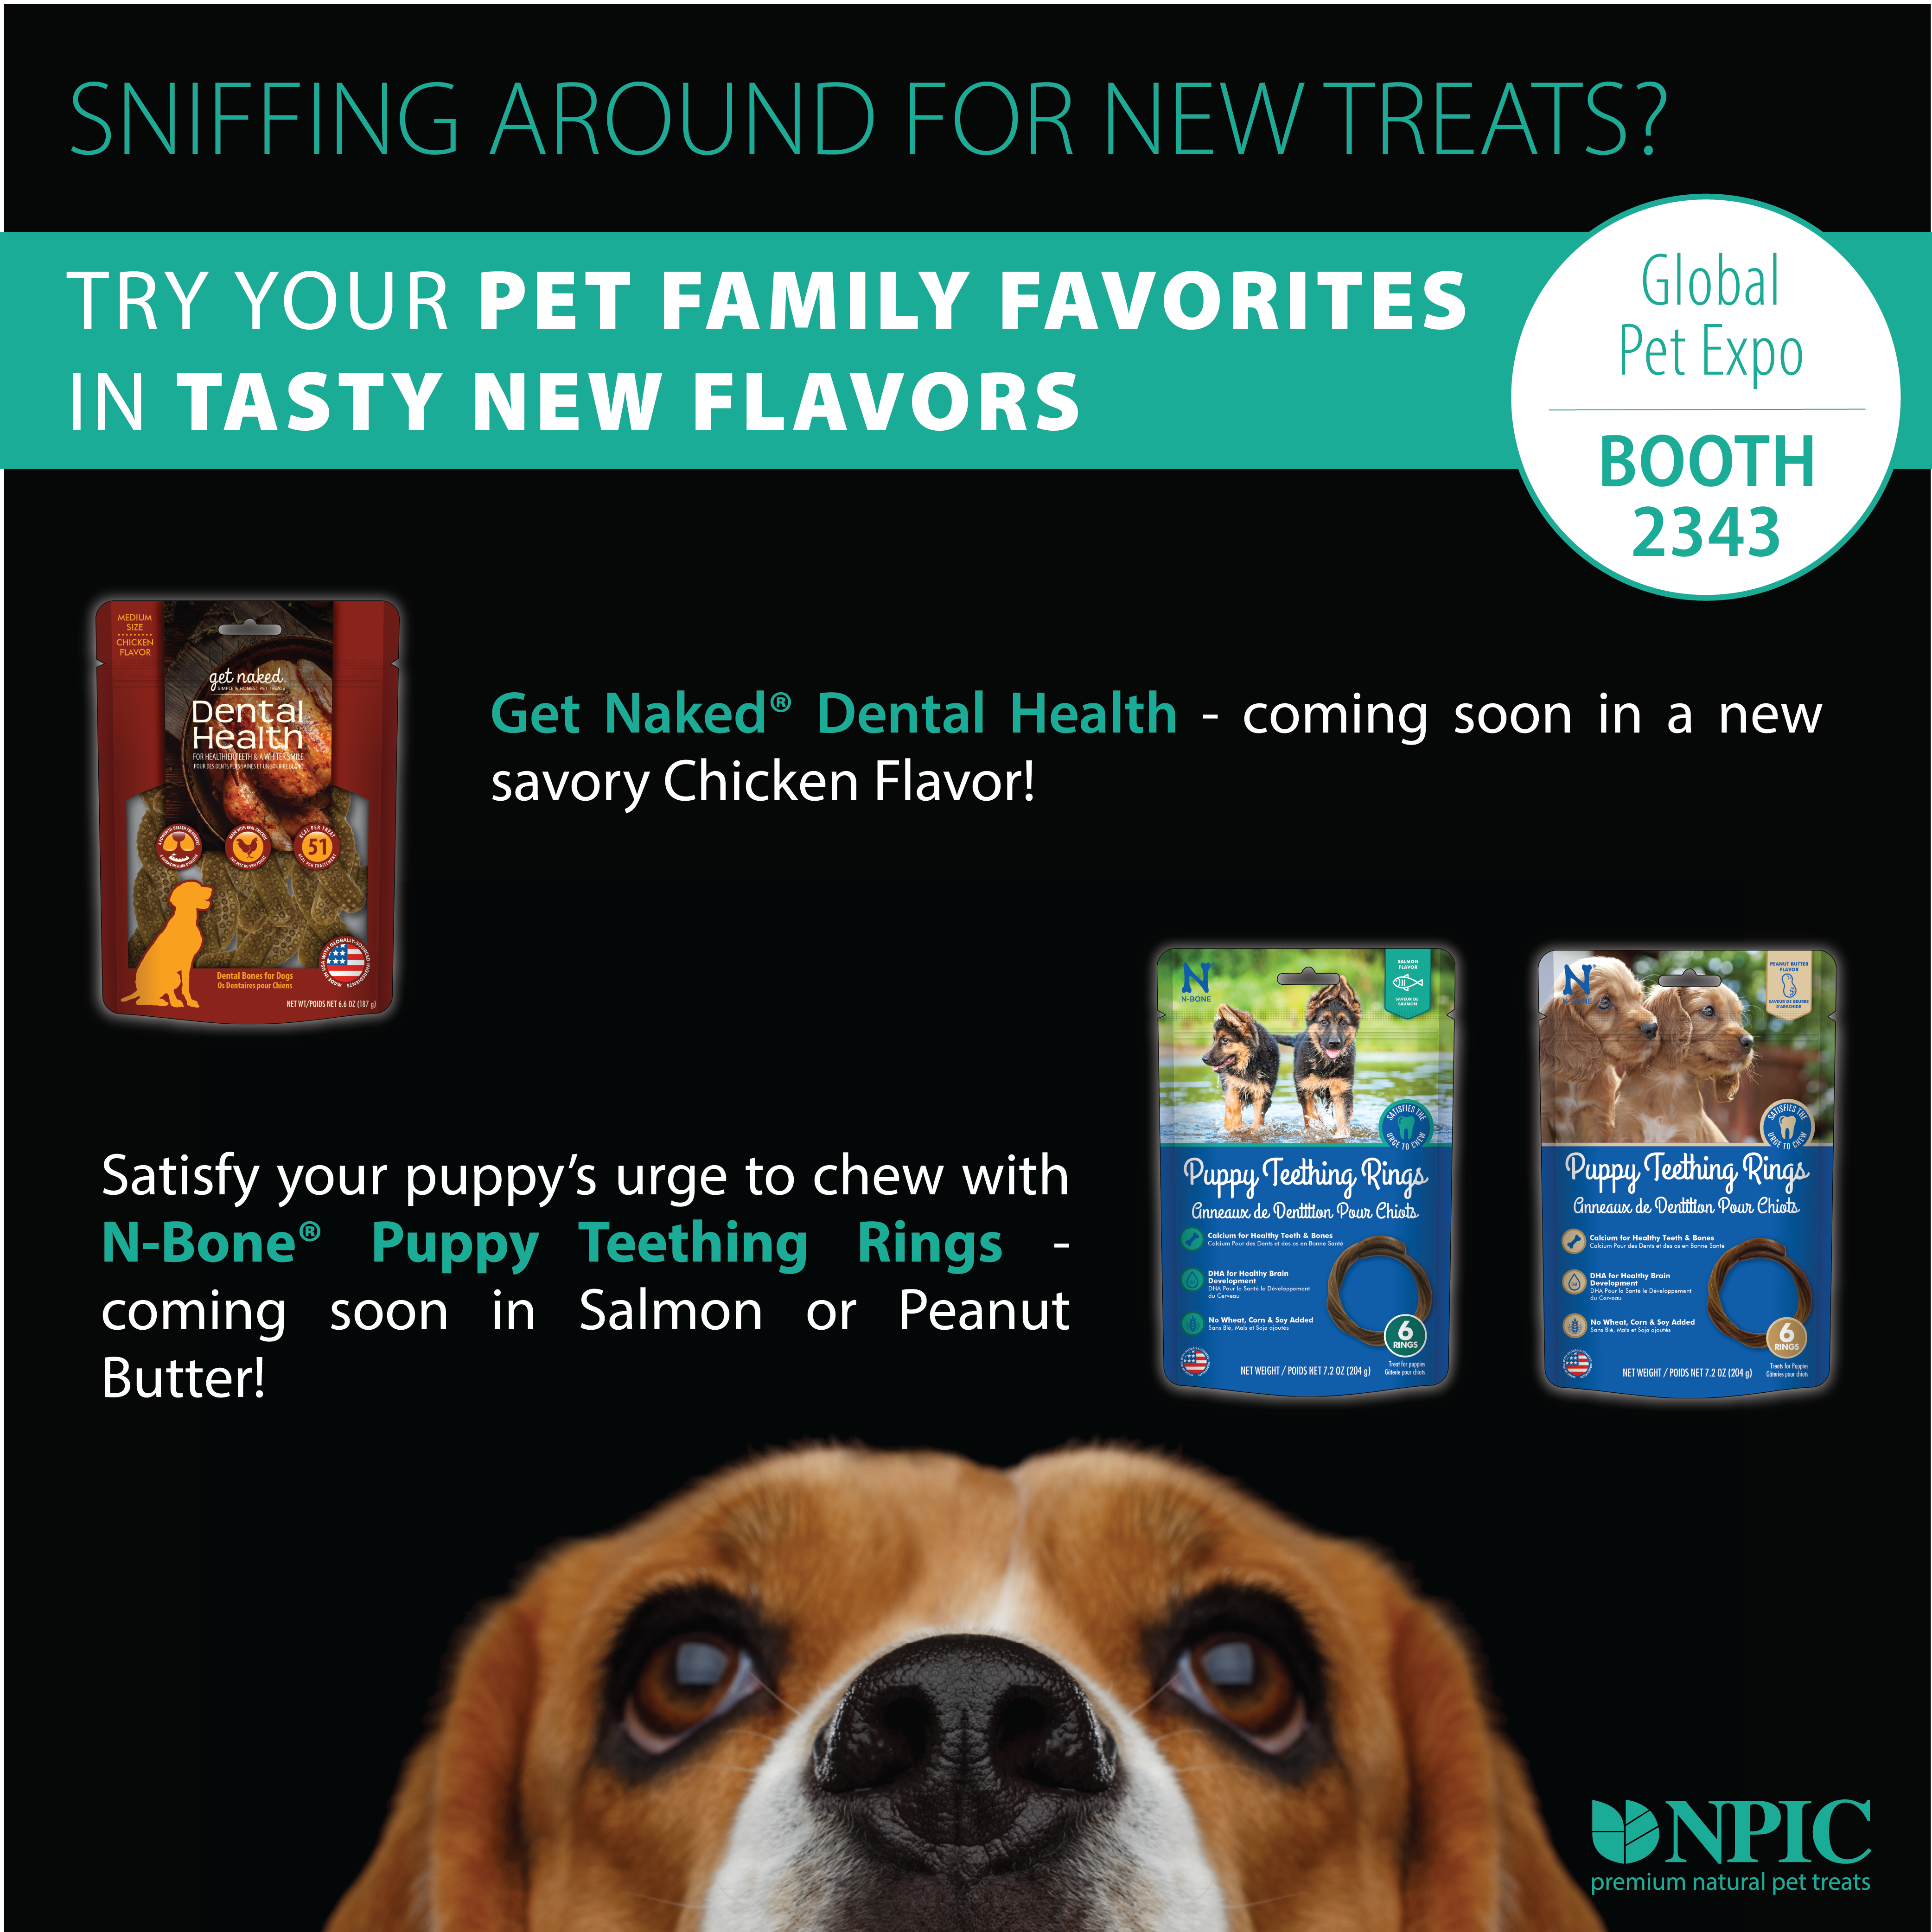 SEE WHAT WE HAVE PLANNED AT GLOBAL PET EXPO – BOOTH #2343